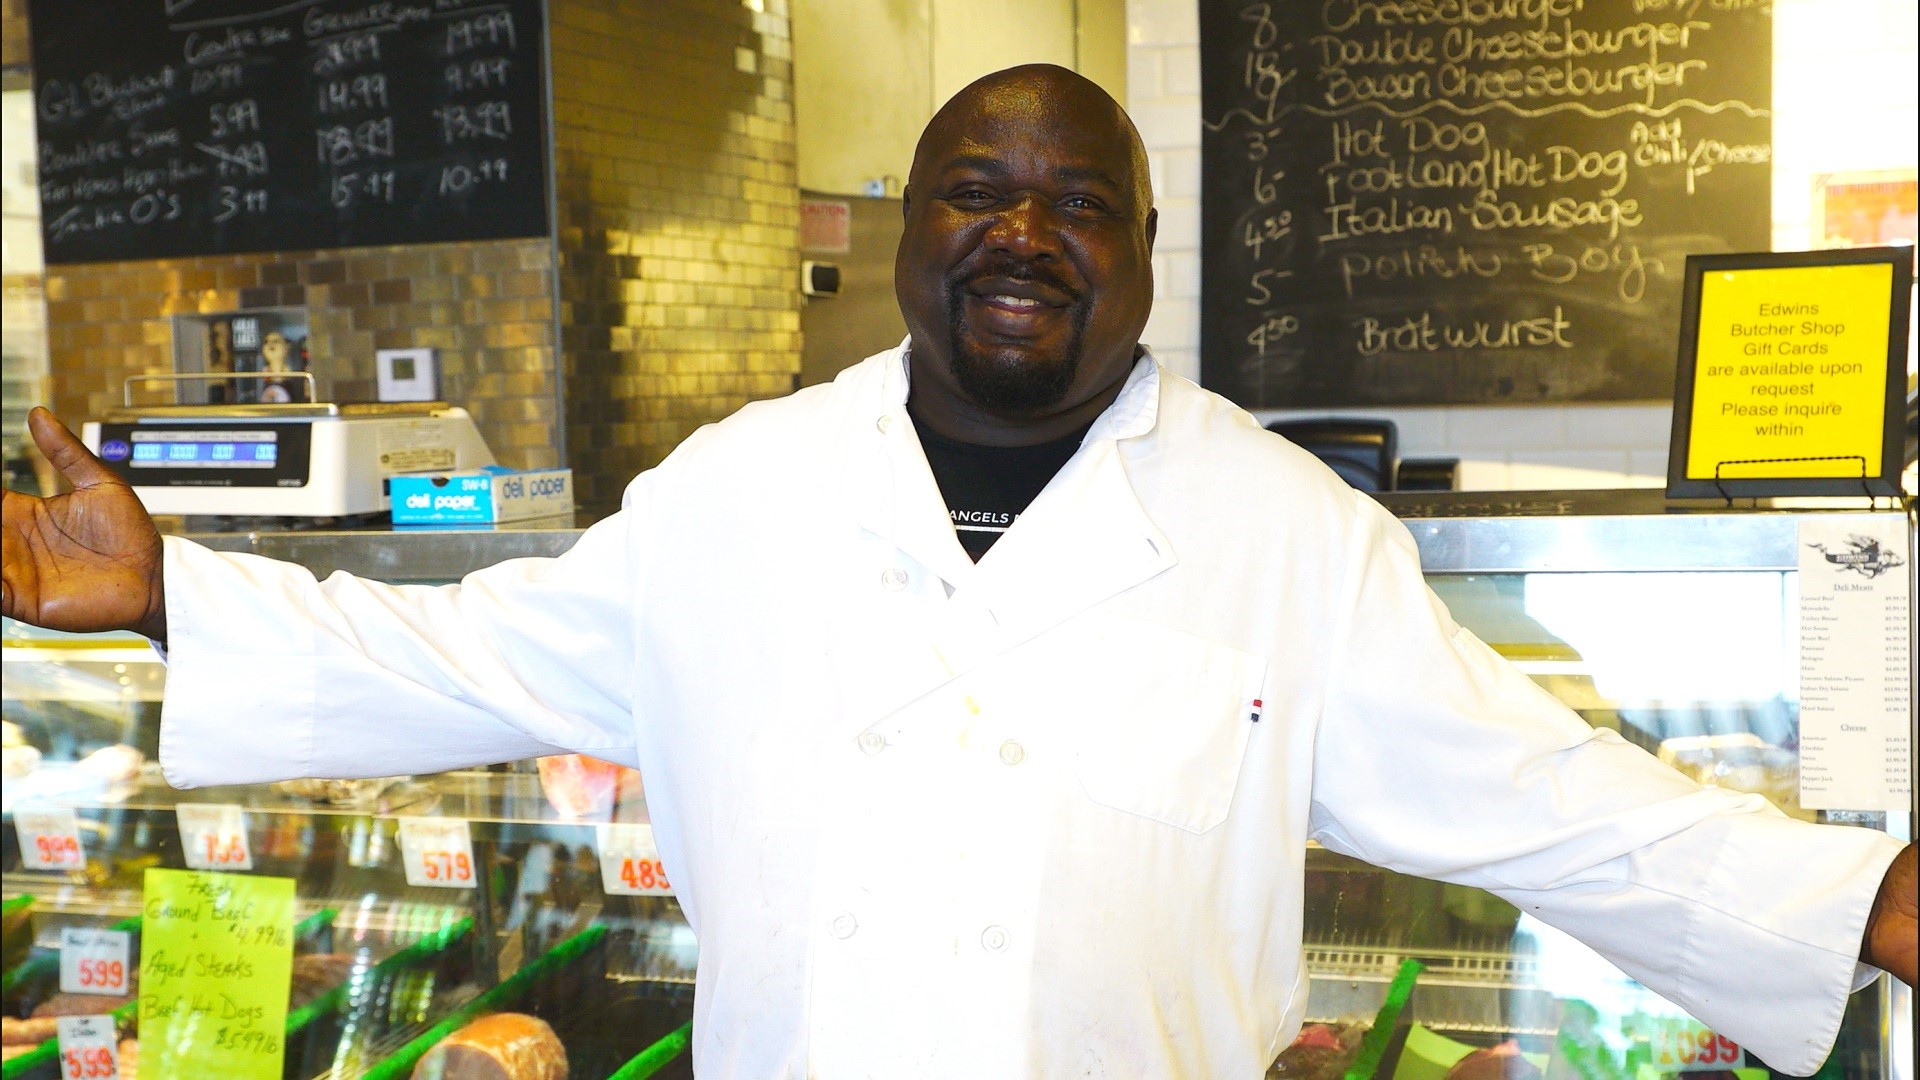 Hardworking Cleveland is a WKYC digital web-series about Clevelanders hard at work. This story is with Gregory Bush, a inmate for 11 years, he got a second chance to hard work as a Chef at Edwins Butcher Shop.